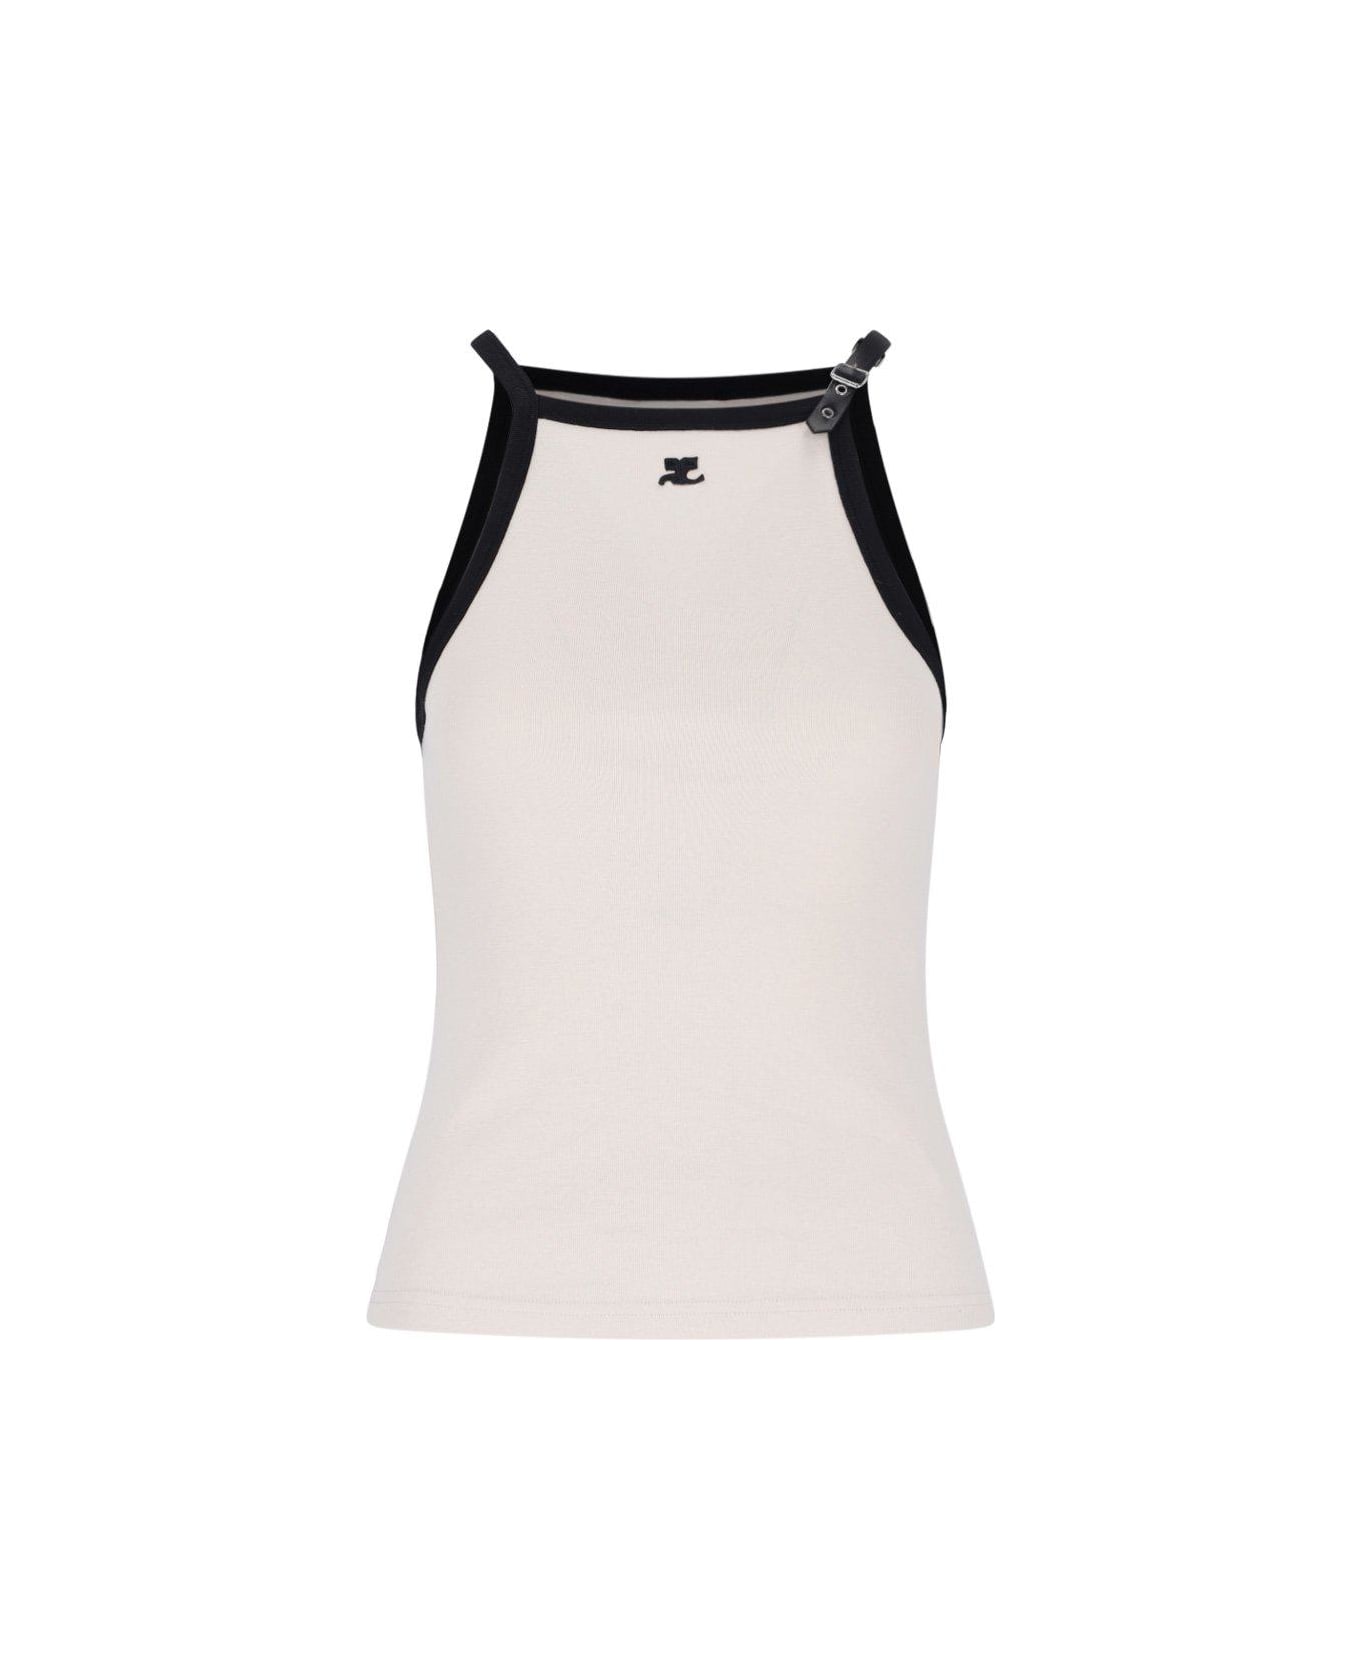 Courrèges Buckle Contrast Tank Top - Lime Stone Black タンクトップ